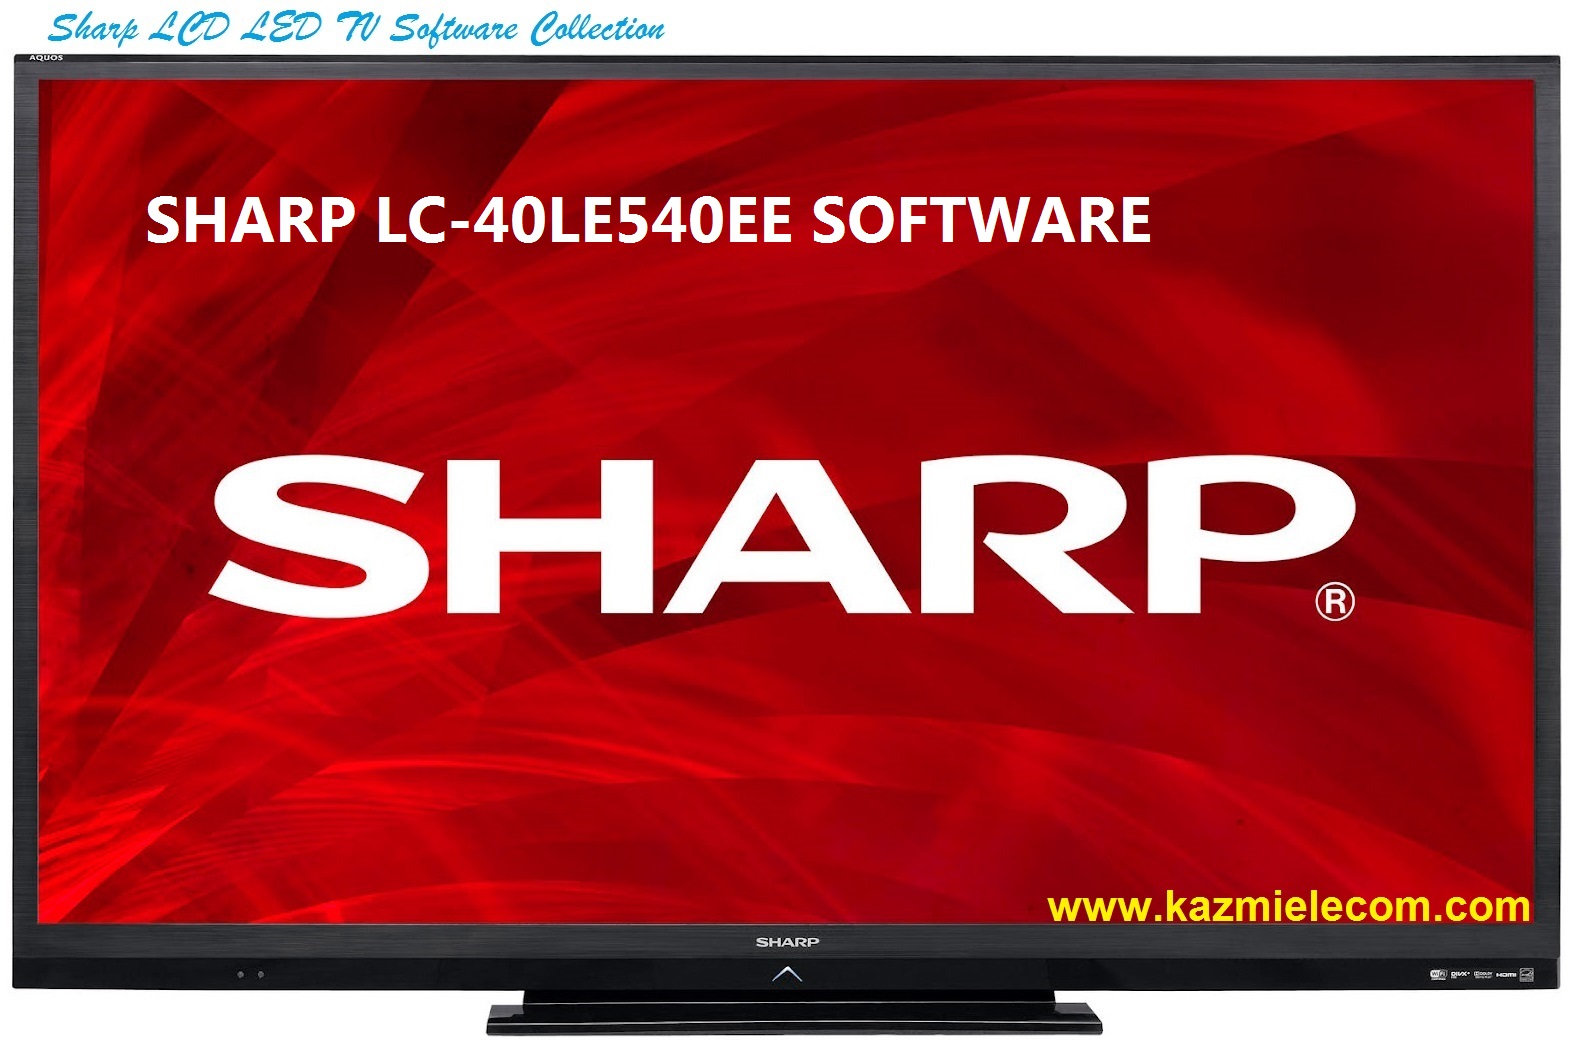 Sharp Lc-40Le540Ee